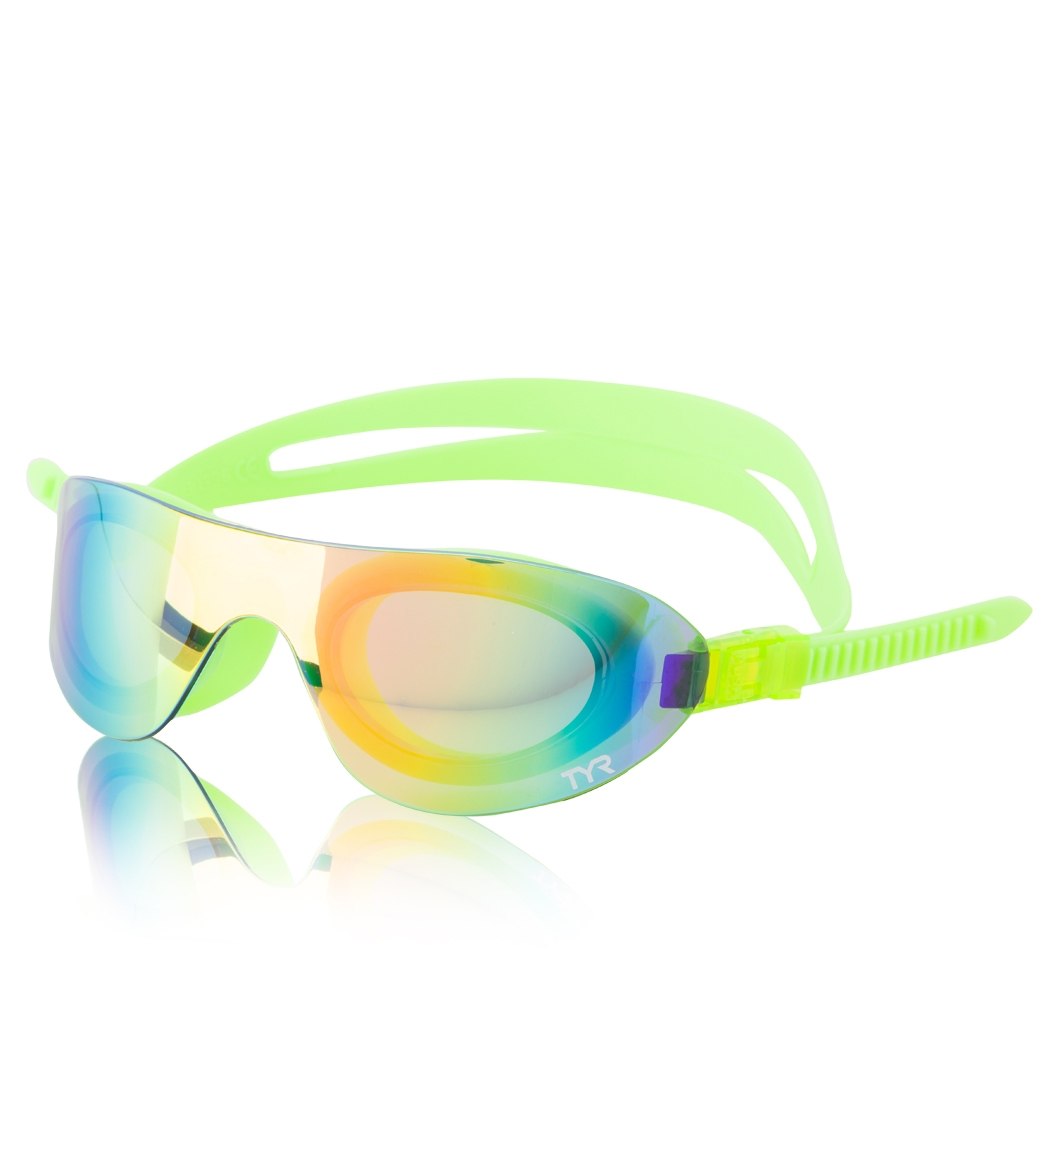 TYR Swim Shades Mirrored Active Goggle at SwimOutlet.com